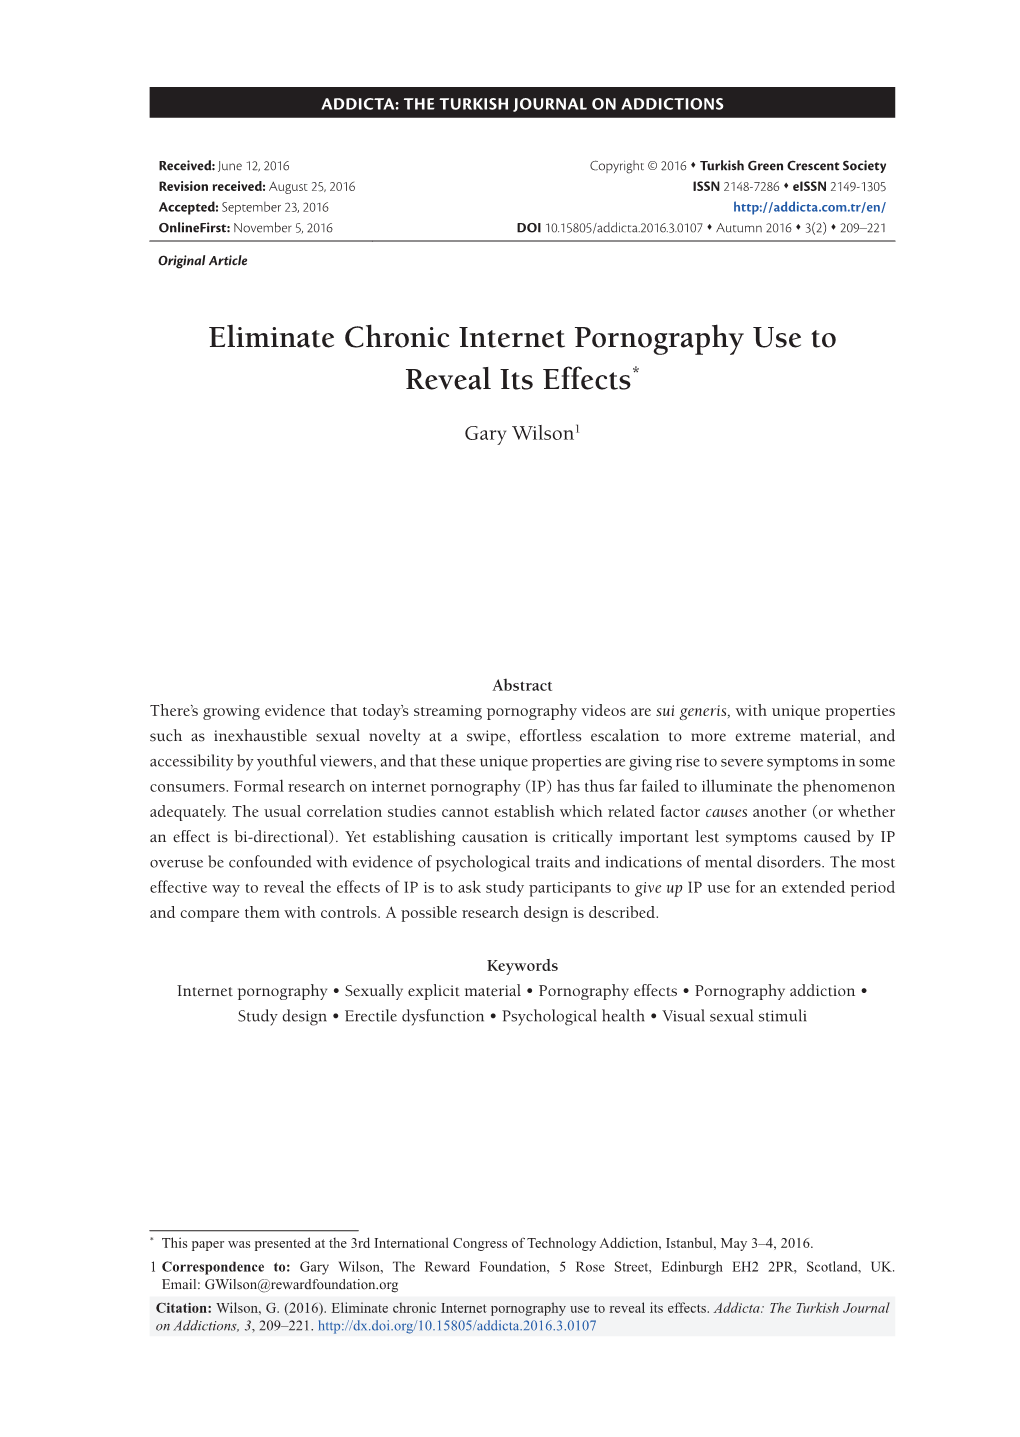 Eliminate Chronic Internet Pornography Use to Reveal Its Effects*